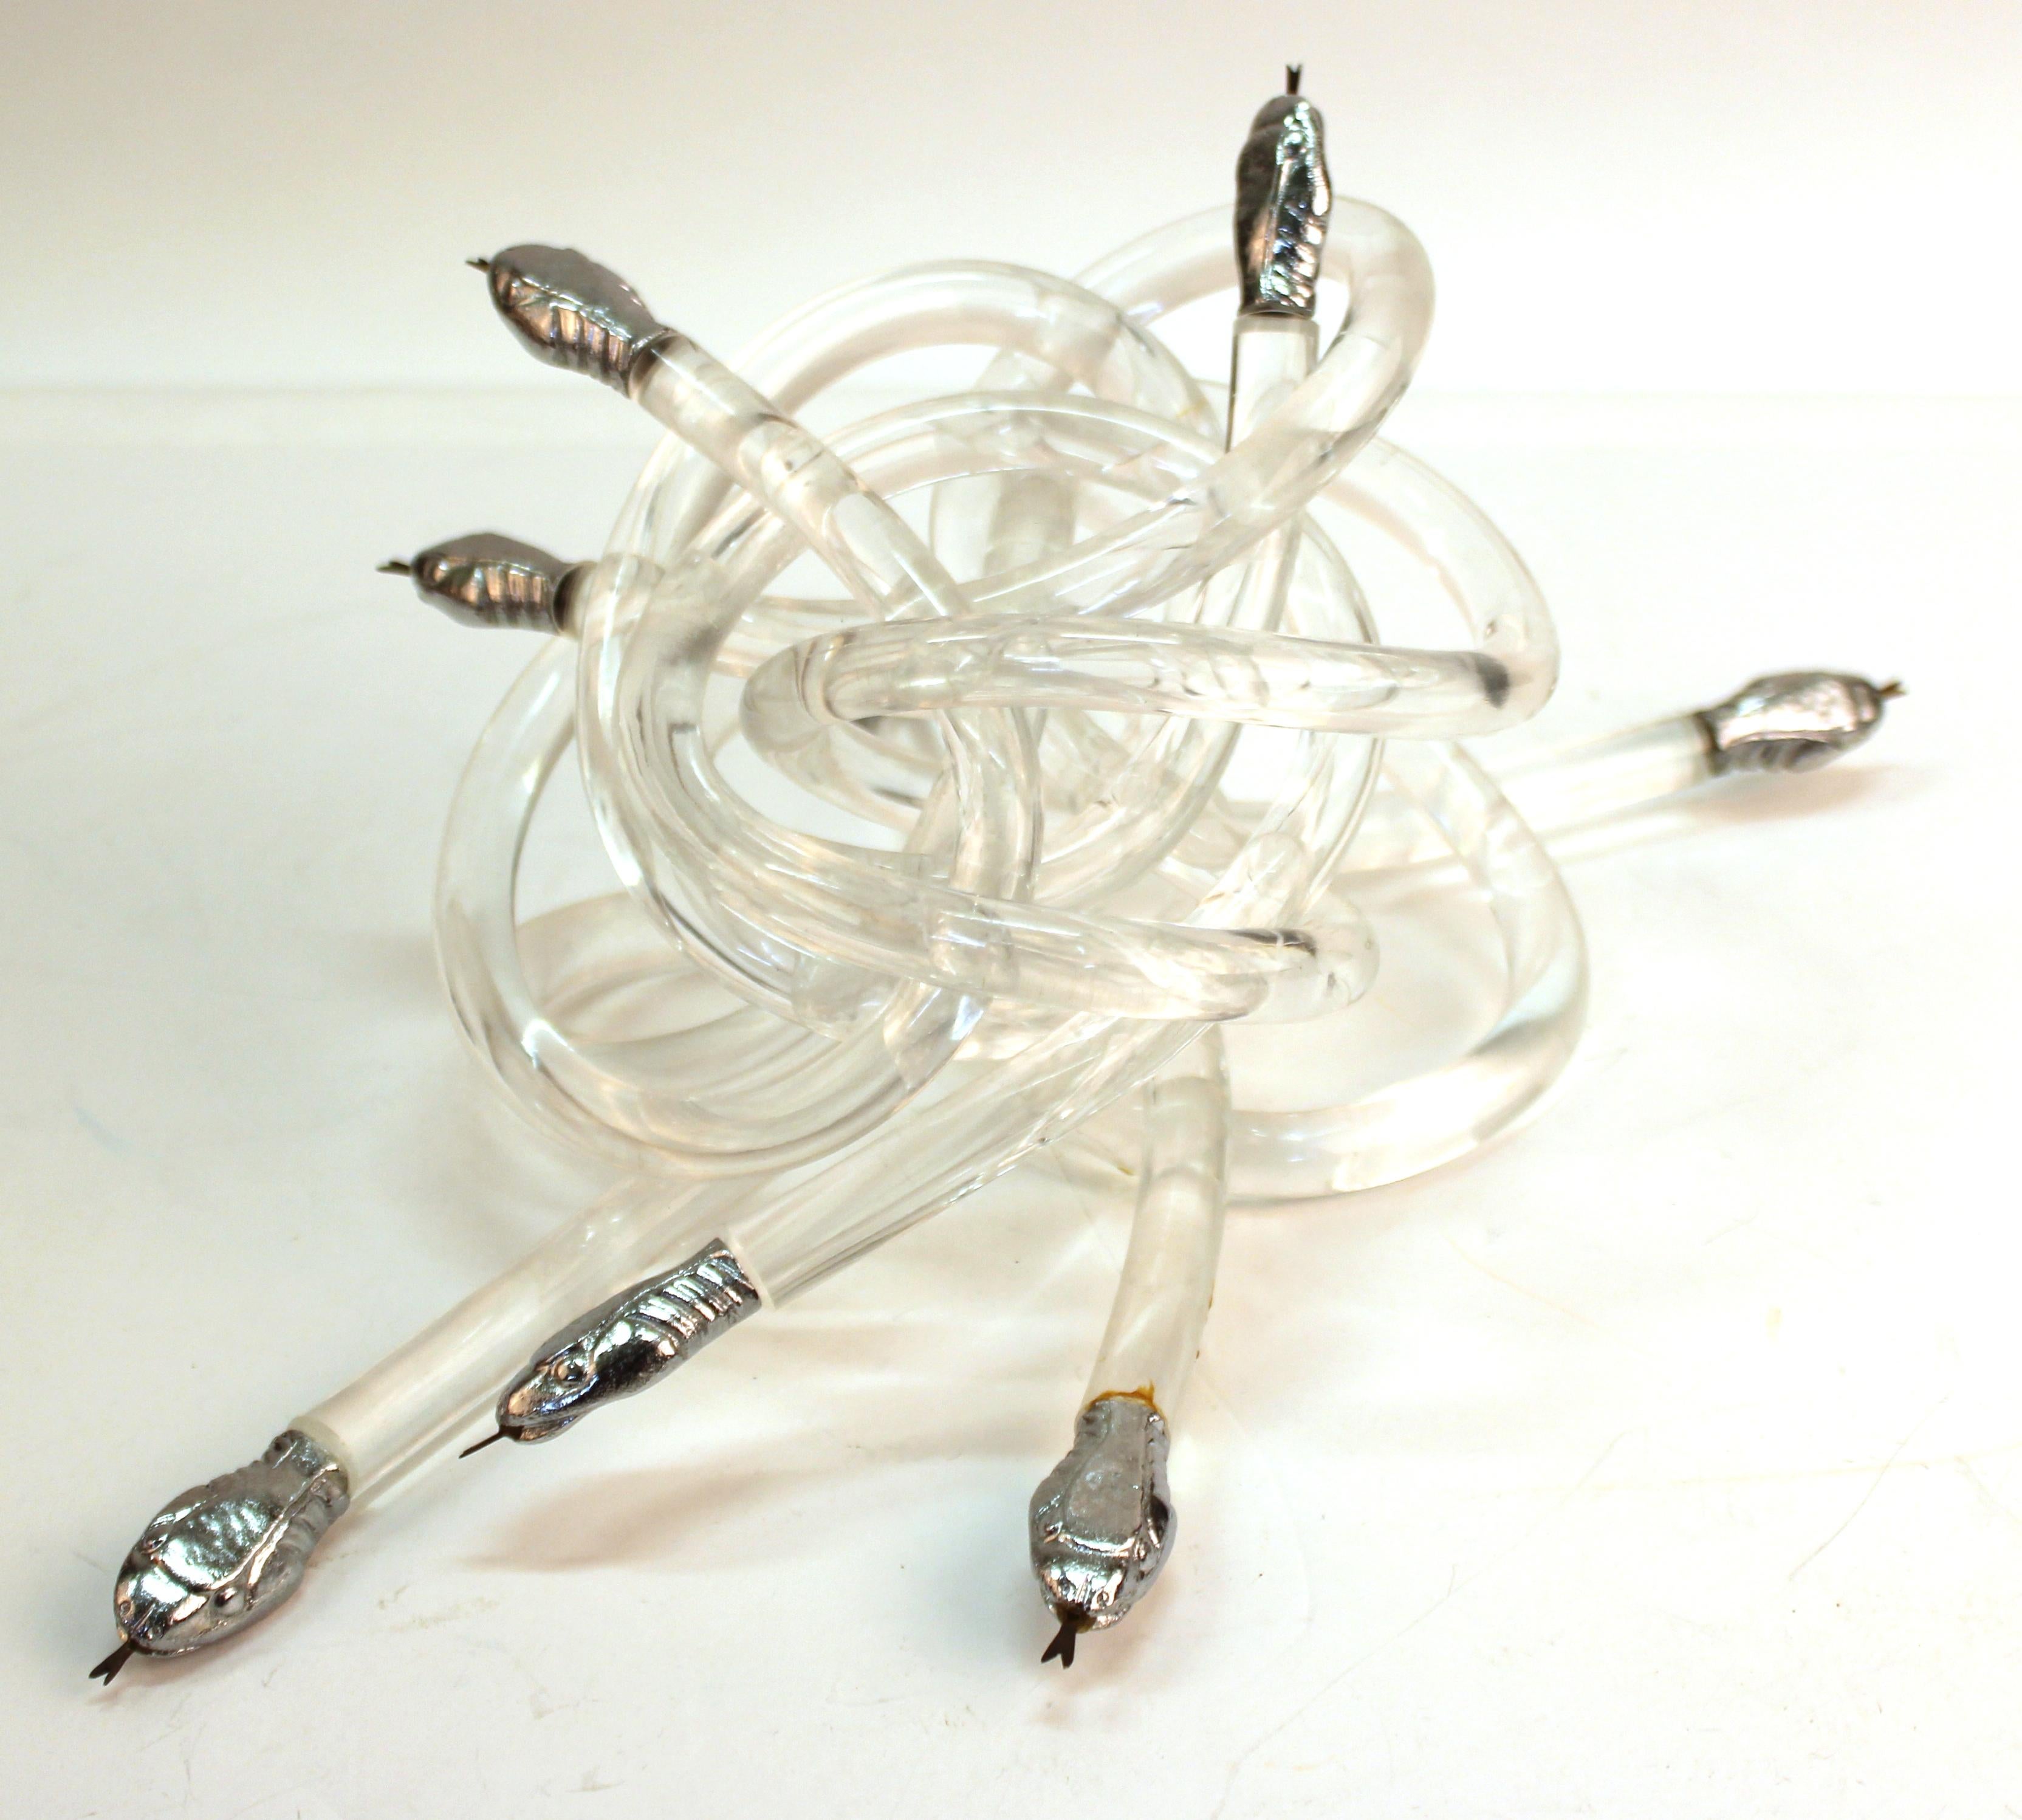 Modern sculpture consisting of snakes with bodies in clear acrylic with metal heads, knotted together into a small mount. The piece is unmarked and in great vintage condition, with age-appropriate wear.